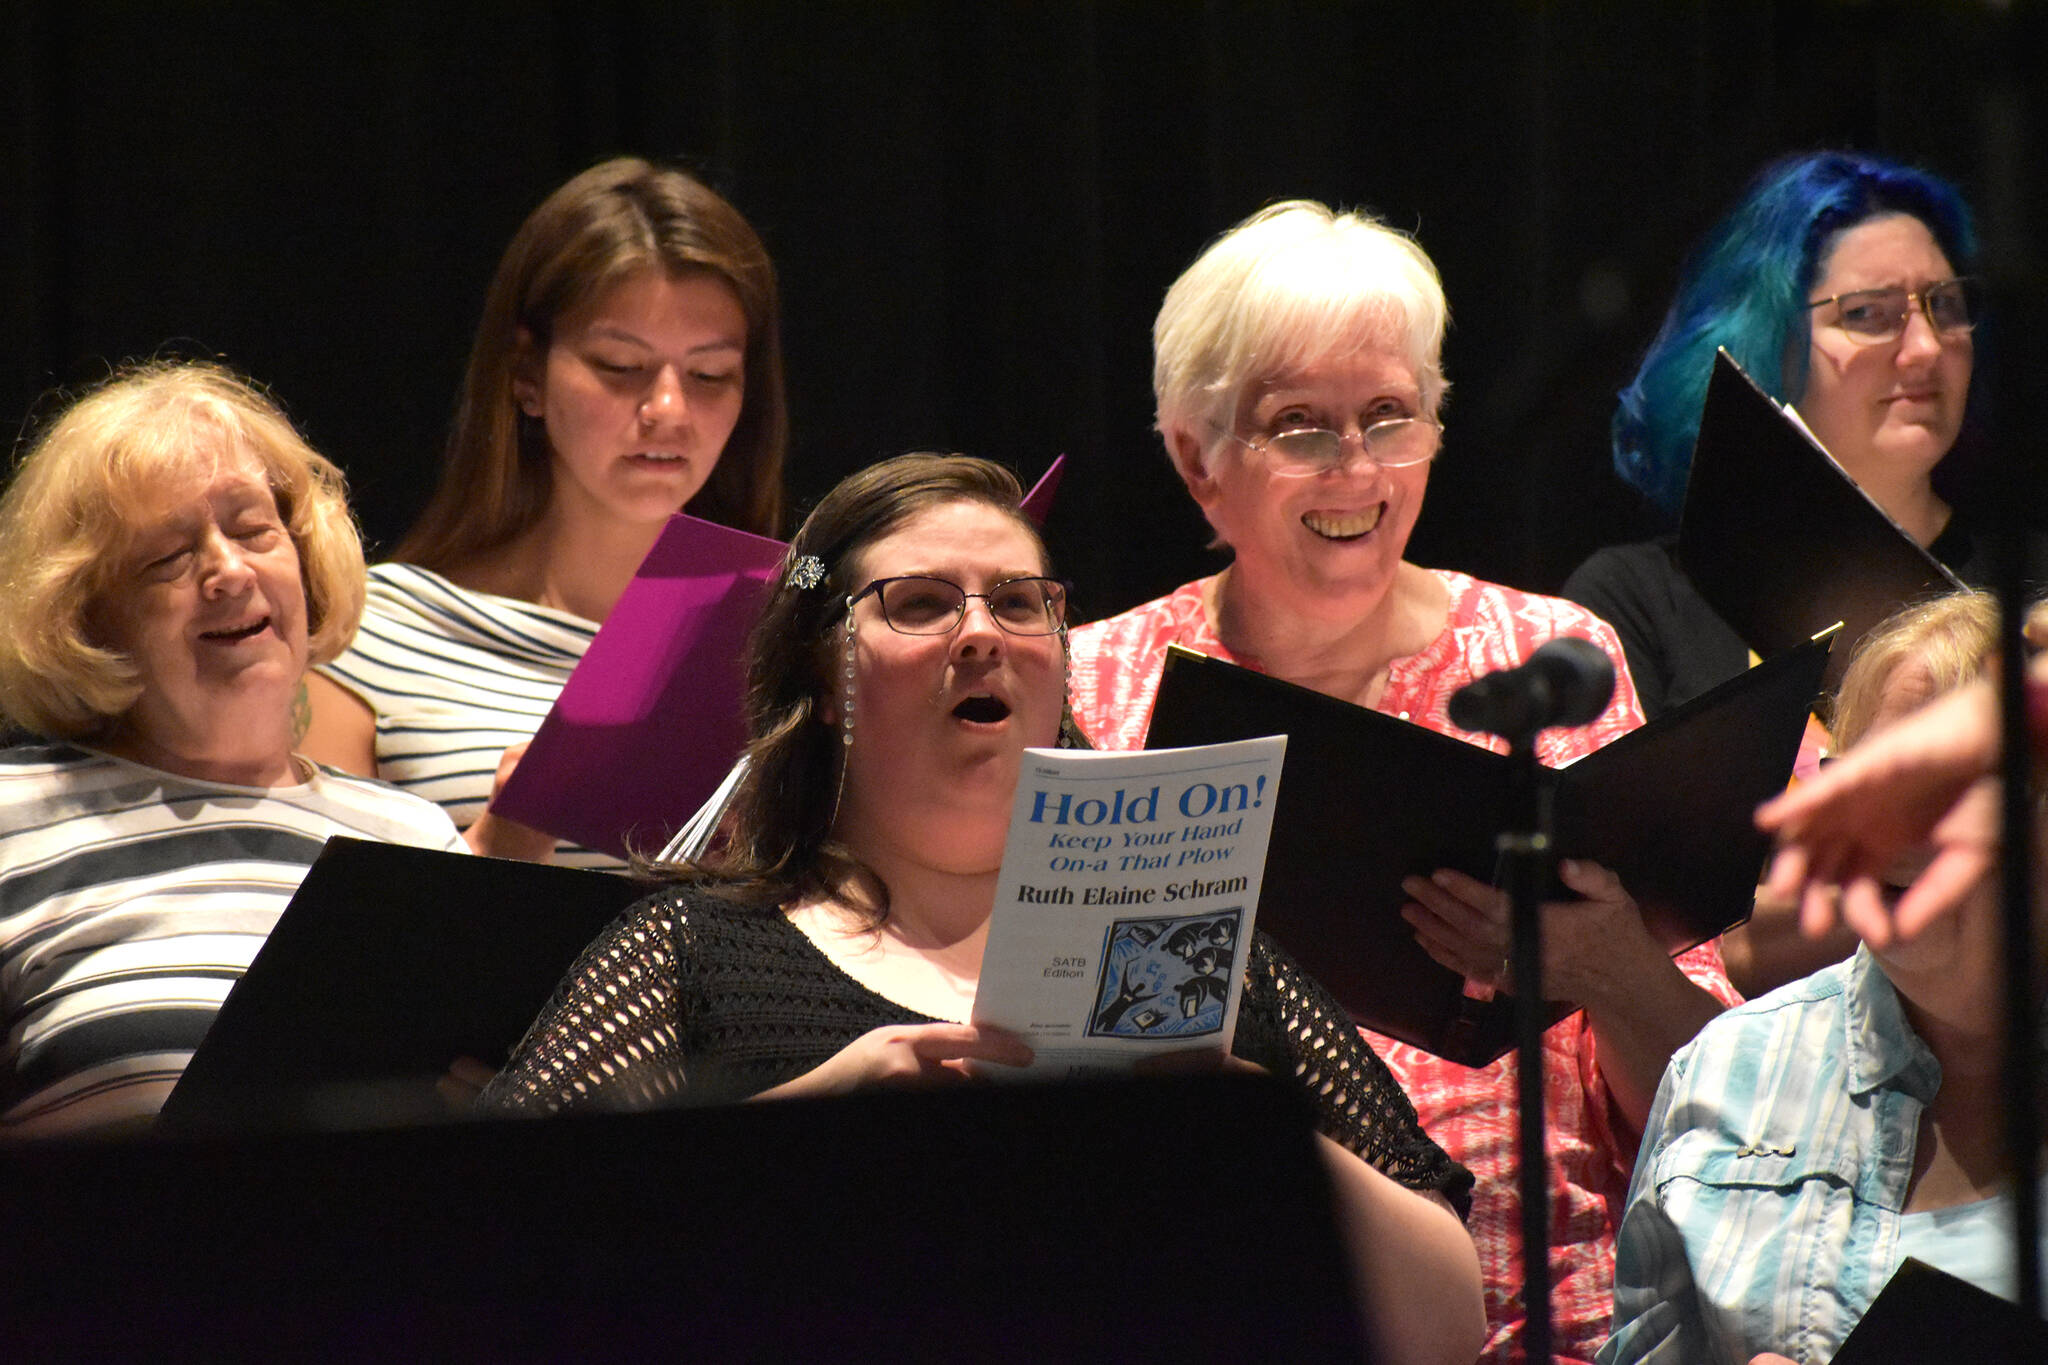 Matthew N. Wells / The Daily World
Sopranos from GHC’s Civic Choir, from left — Cheryl Guth, Trisha Charlie, Laurel Sheffield, Marrilee Rhoads and Alexa Amarok — sing “Hold On,” during Tuesday night’s rehearsal at The Bishop Center for the Performing Arts. It was the last rehearsal before Sunday’s performance, which begins at 2 p.m. It’ll be followed by the college’s concert band.